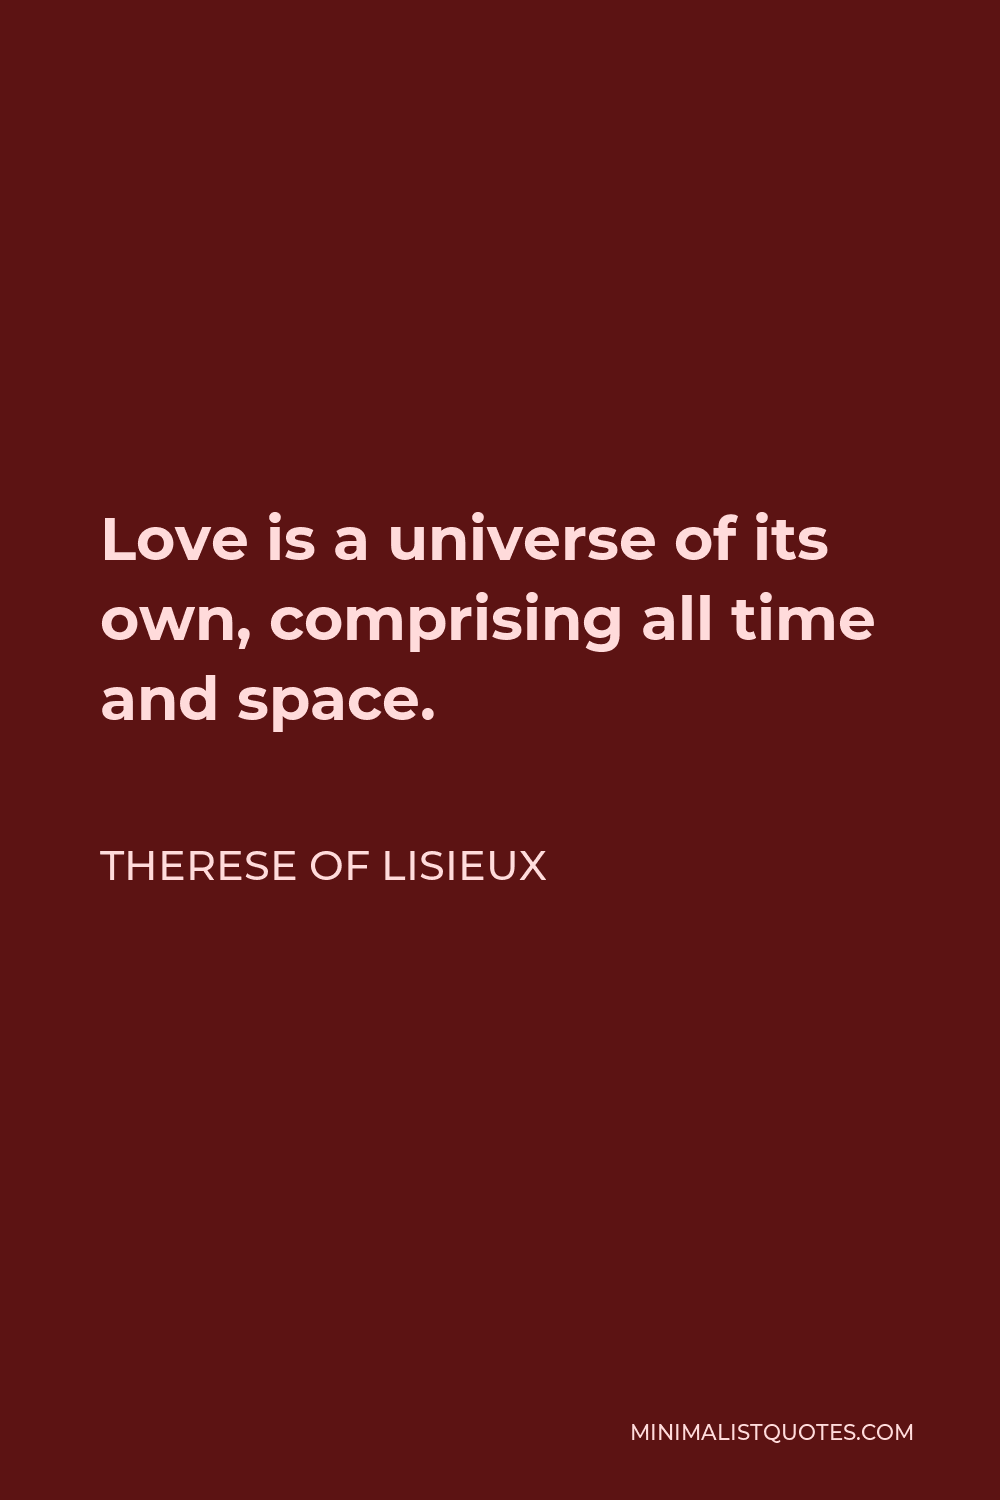 Therese of Lisieux Quote - Love is a universe of its own, comprising all time and space.